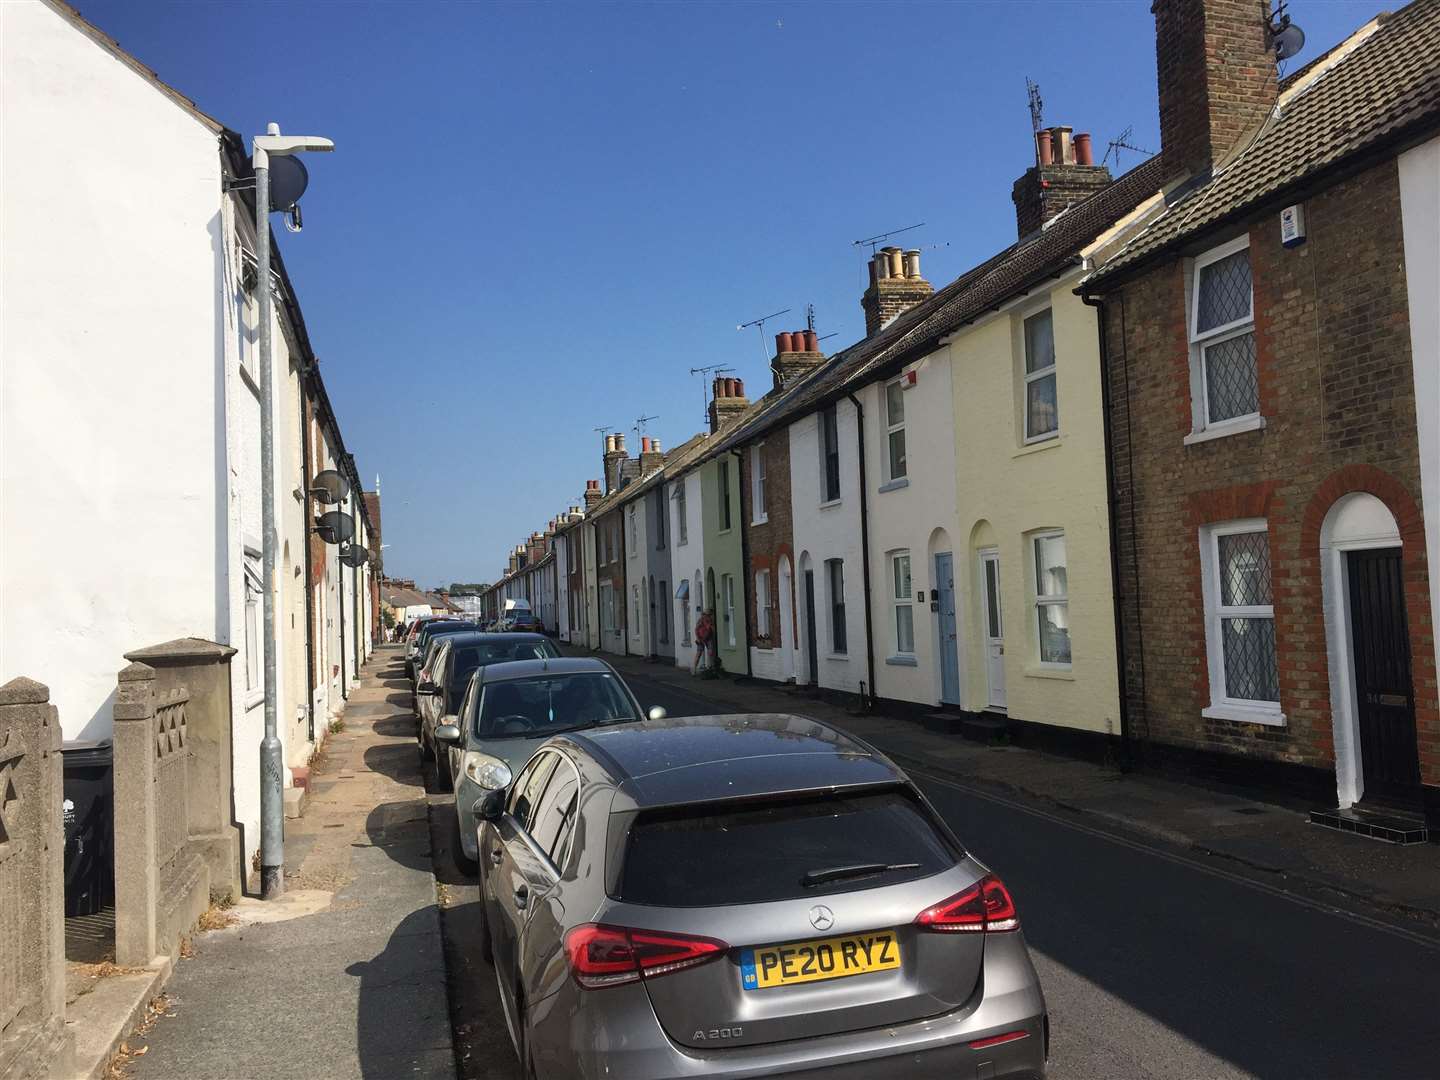 Albert Street, Whitstable, where there are many holiday lets